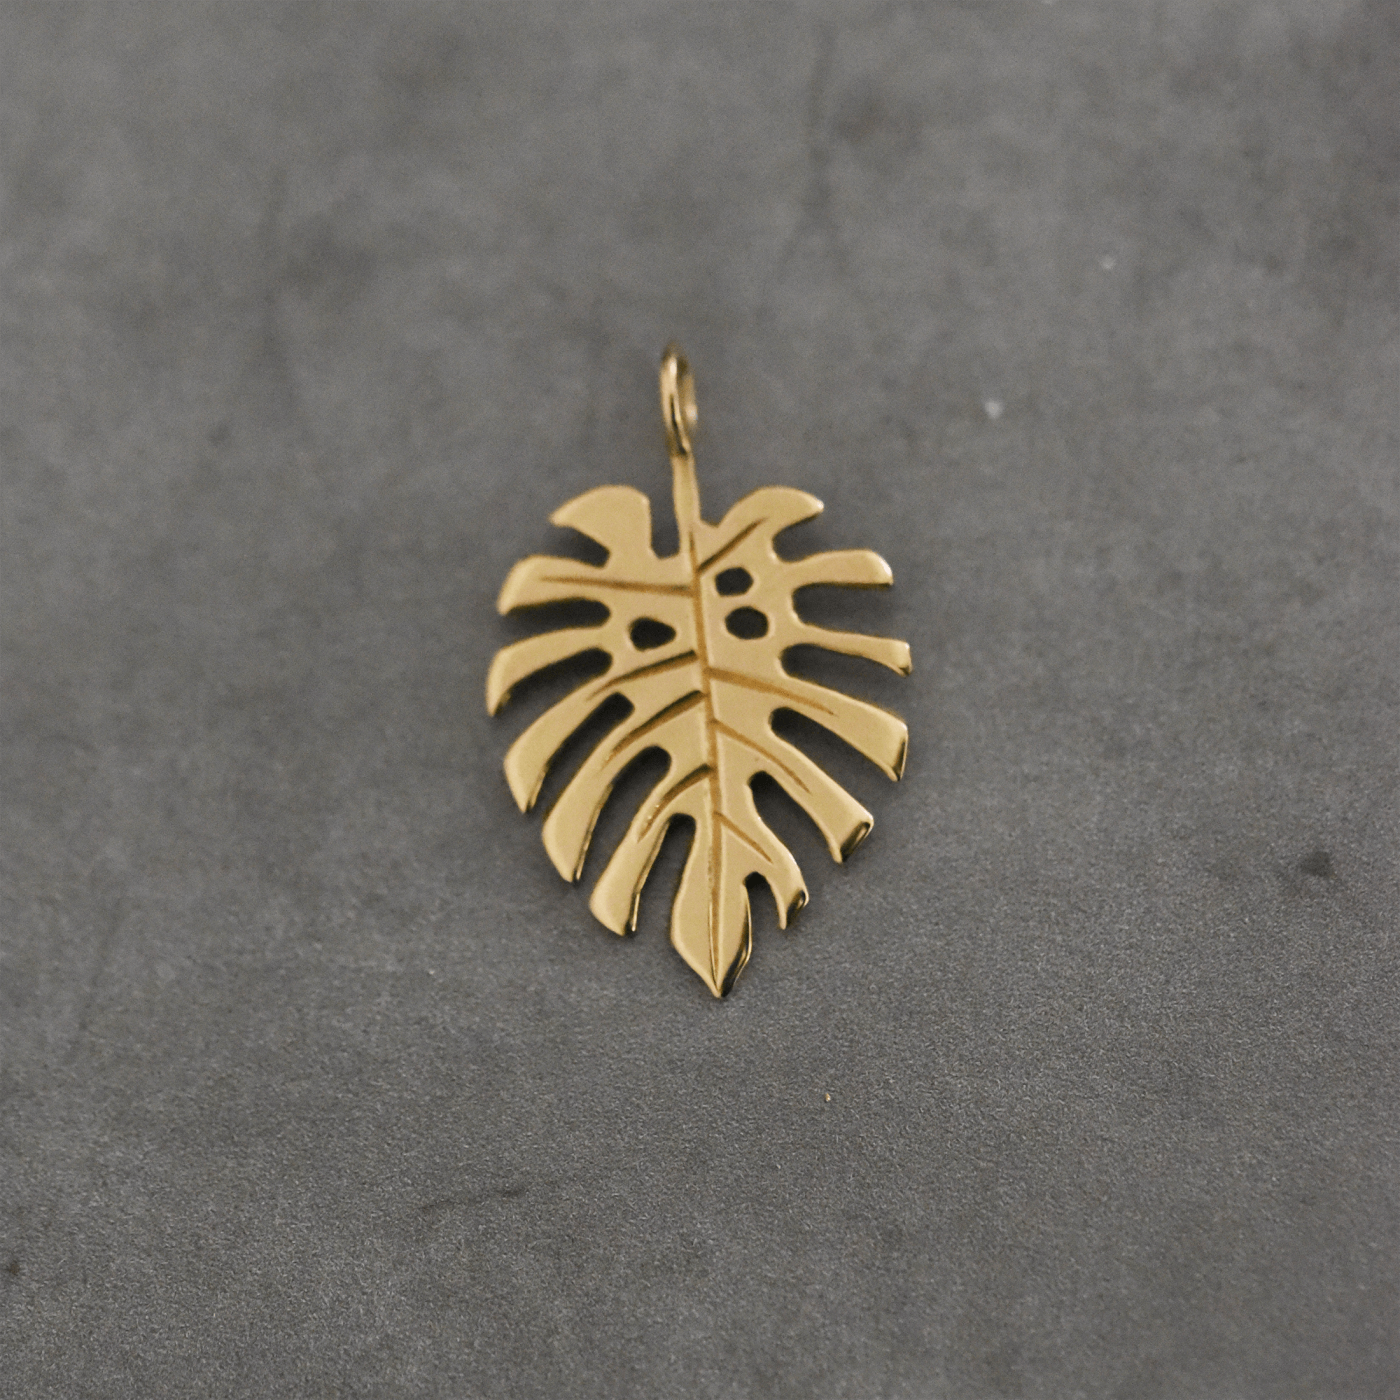 Gold Monstera Charm by Corkie Bolton Jewelry photgraphed on Replica Surfaces.